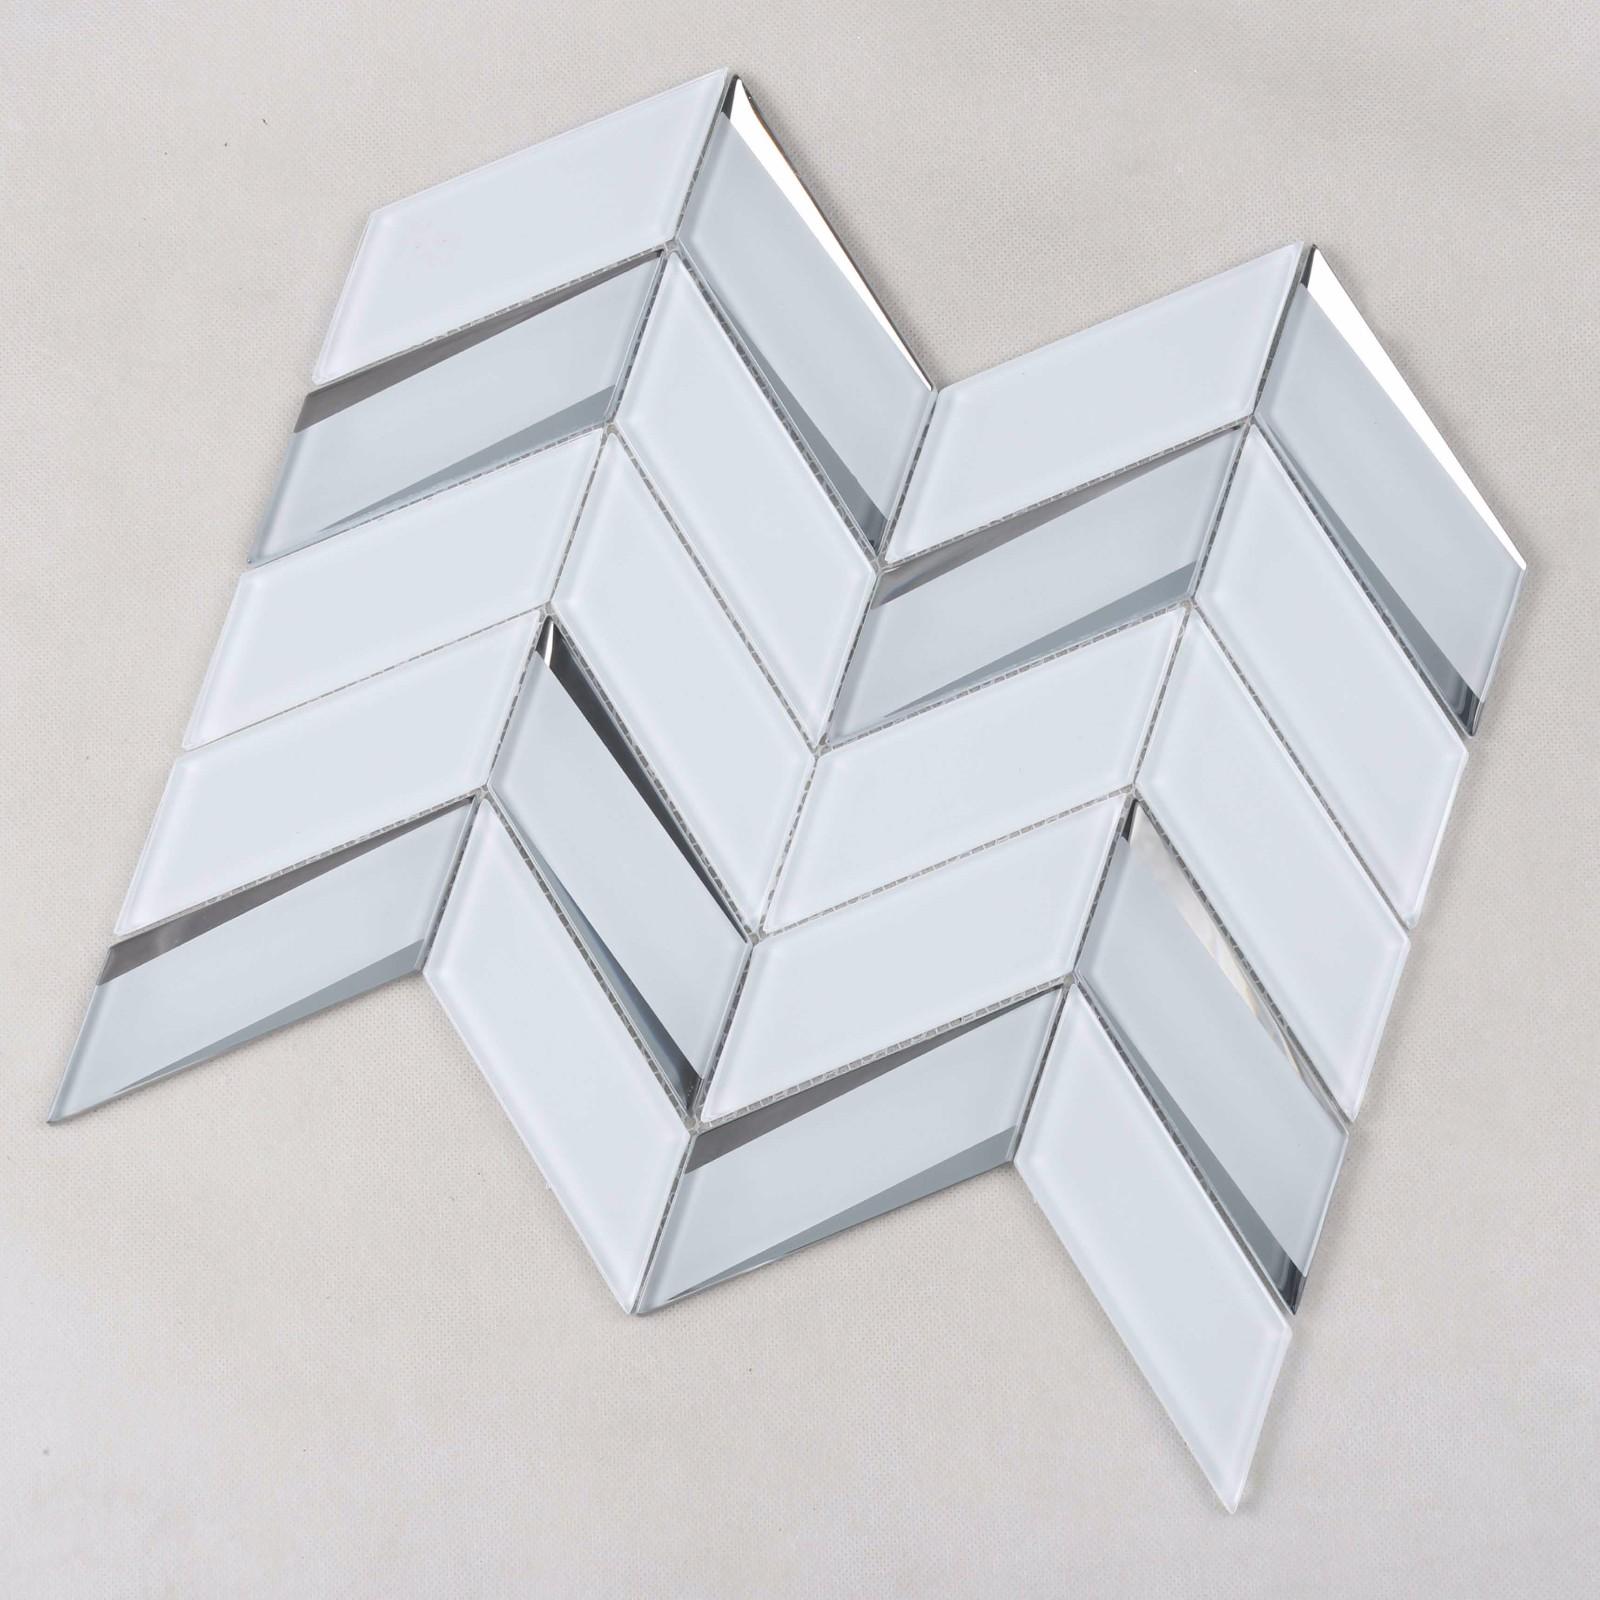 Heng Xing 3x3 3d tile Suppliers for bathroom-2